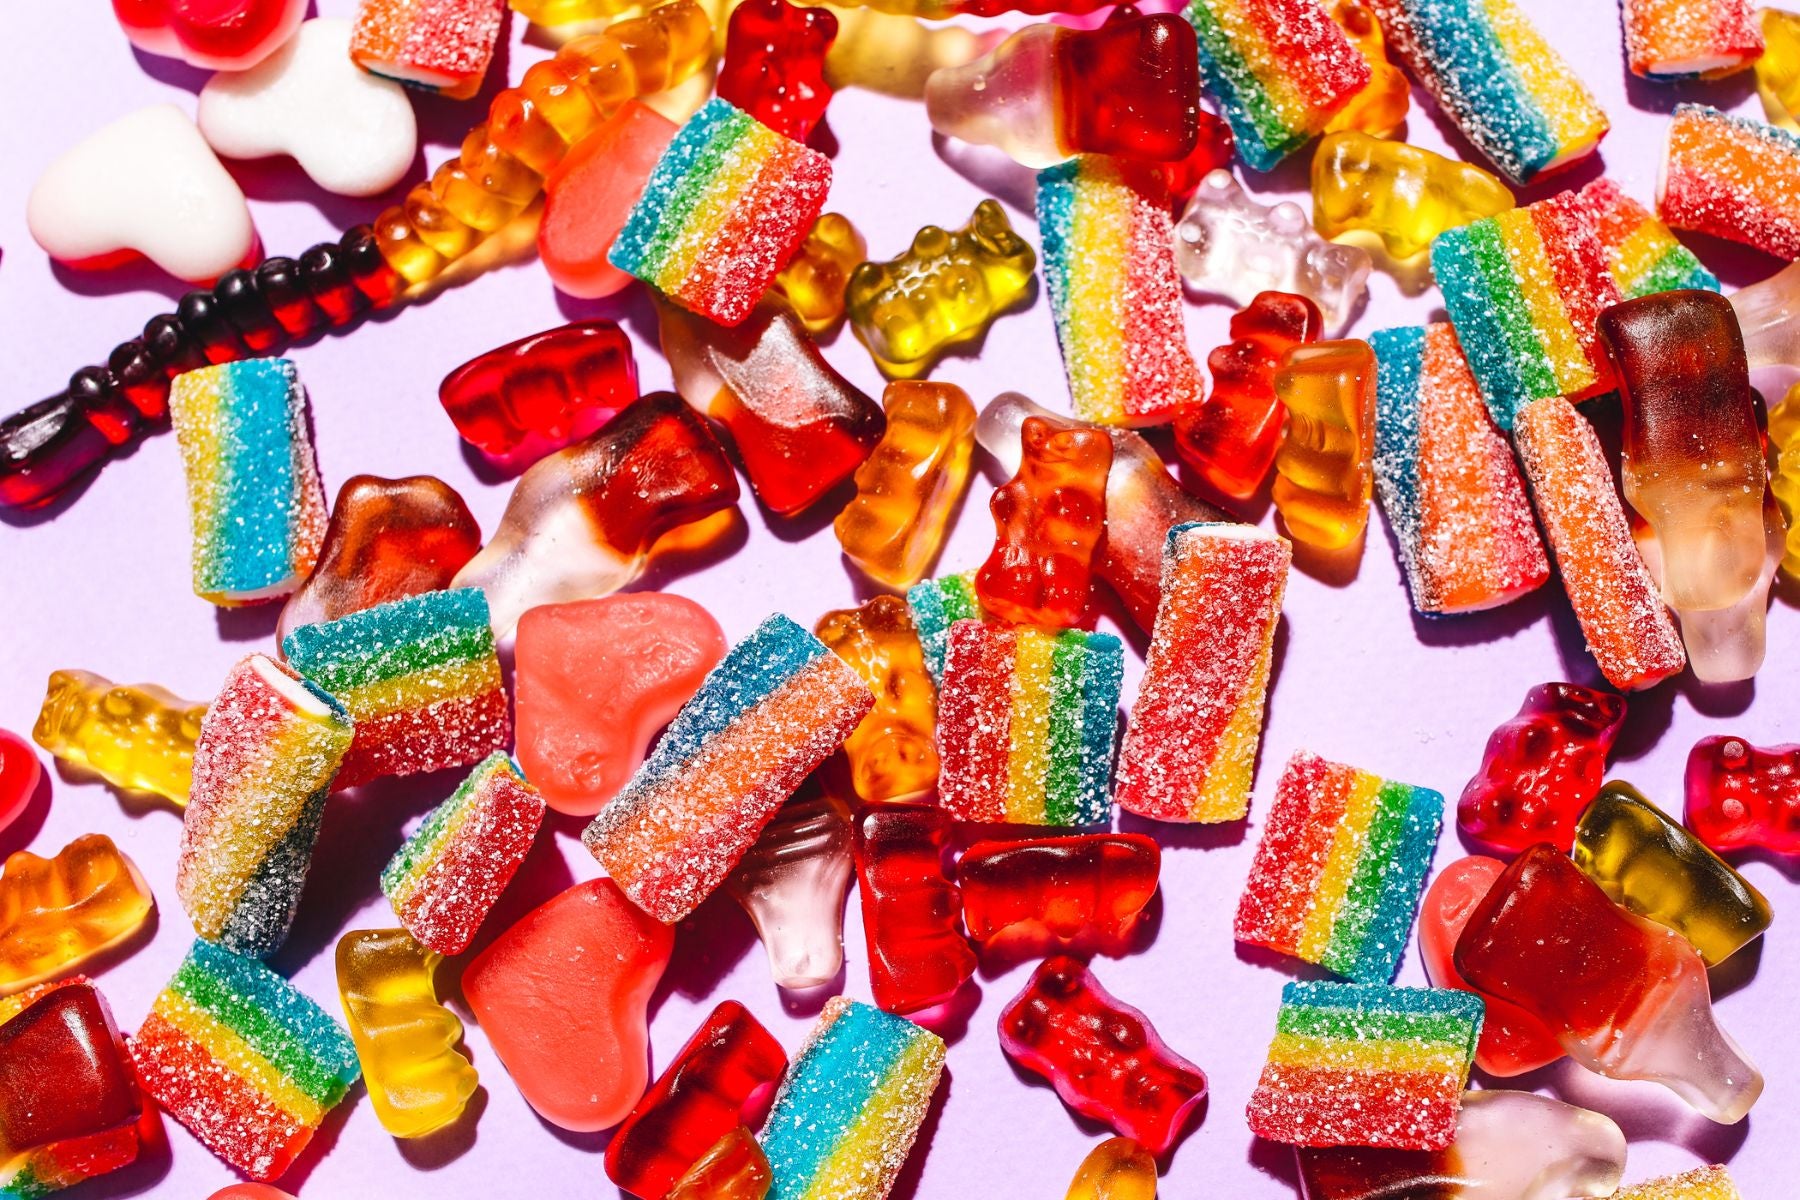 6 Top-Selling Types of Gummies: The Fascinating Science Behind Them